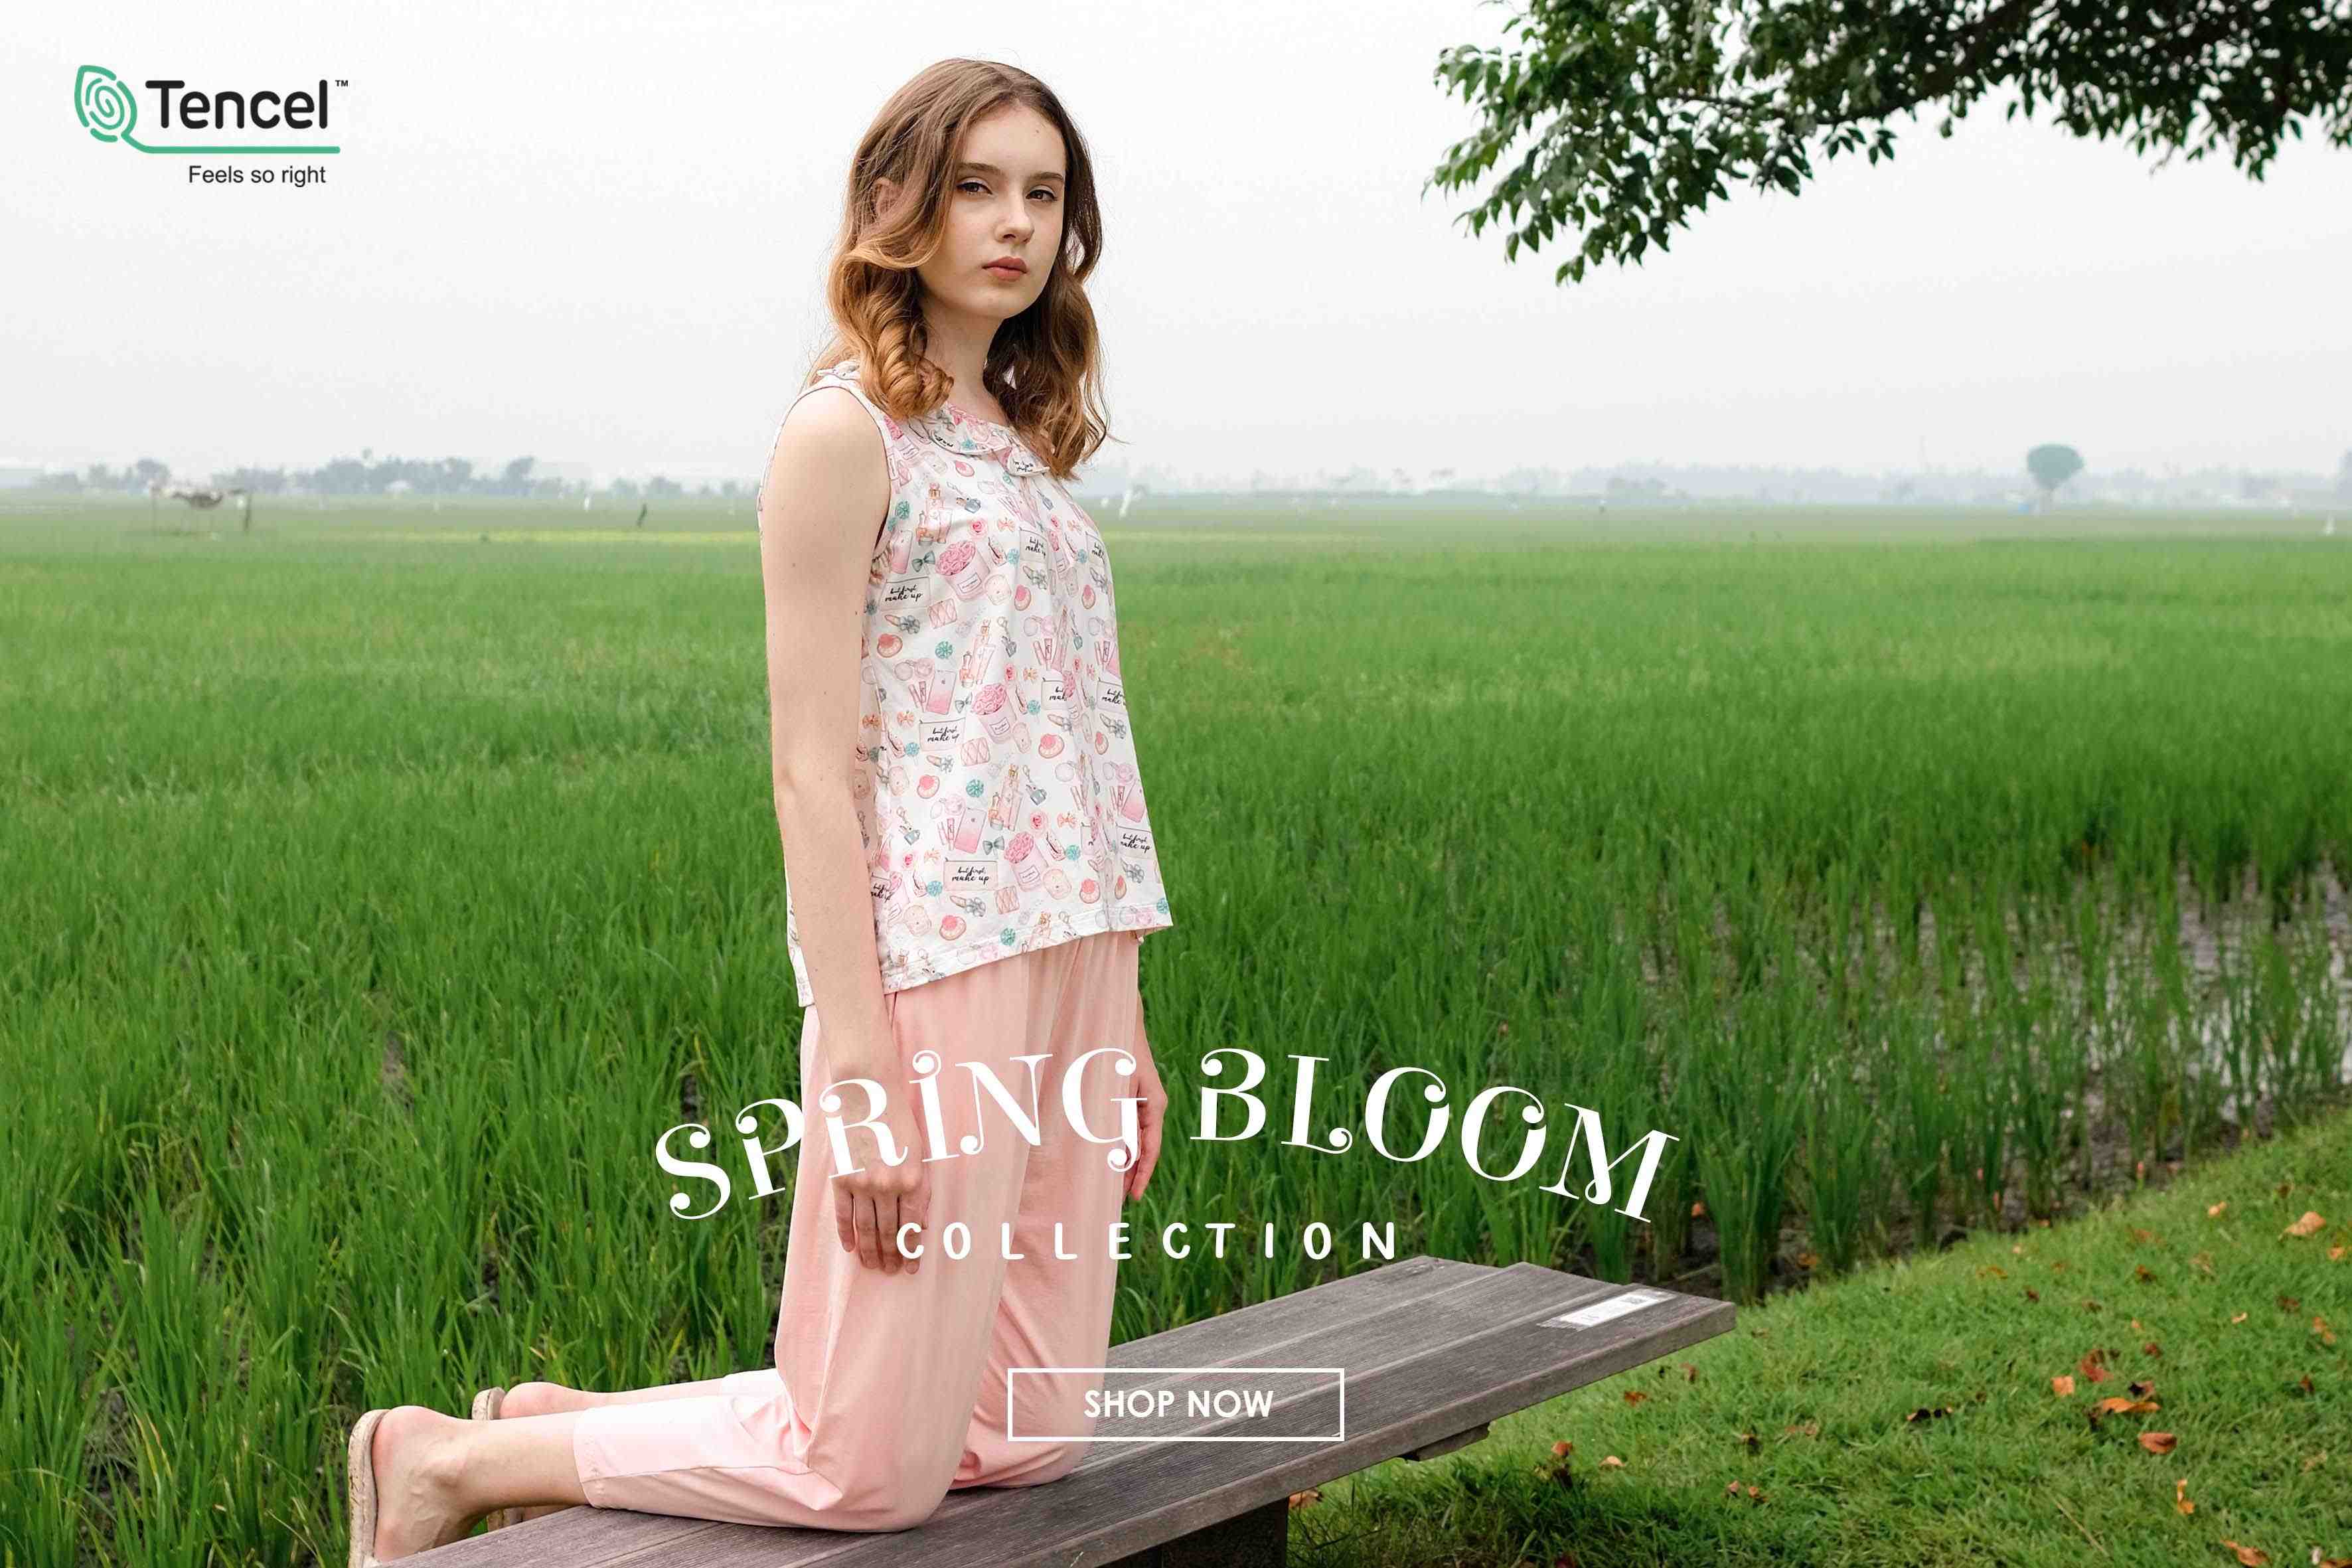 spring collection